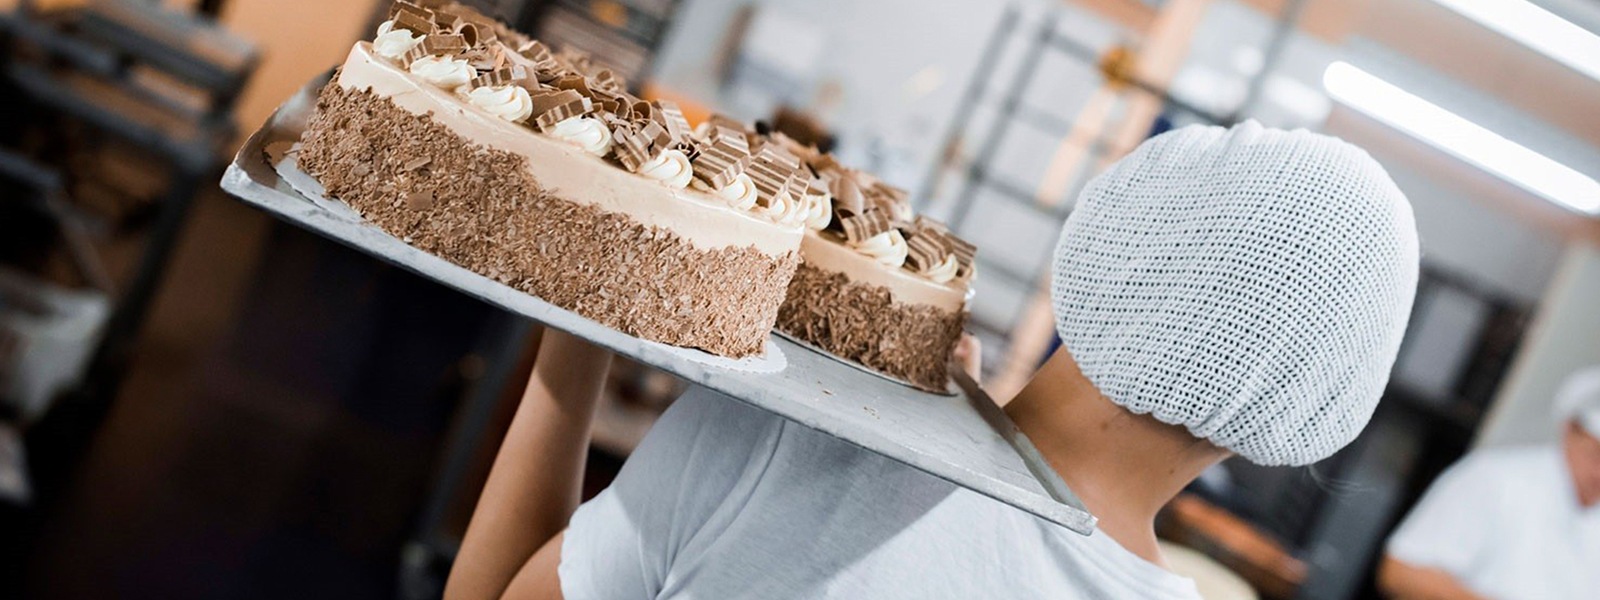 A worker carrying a large sheet pan with multiple cakes on their shoulder.